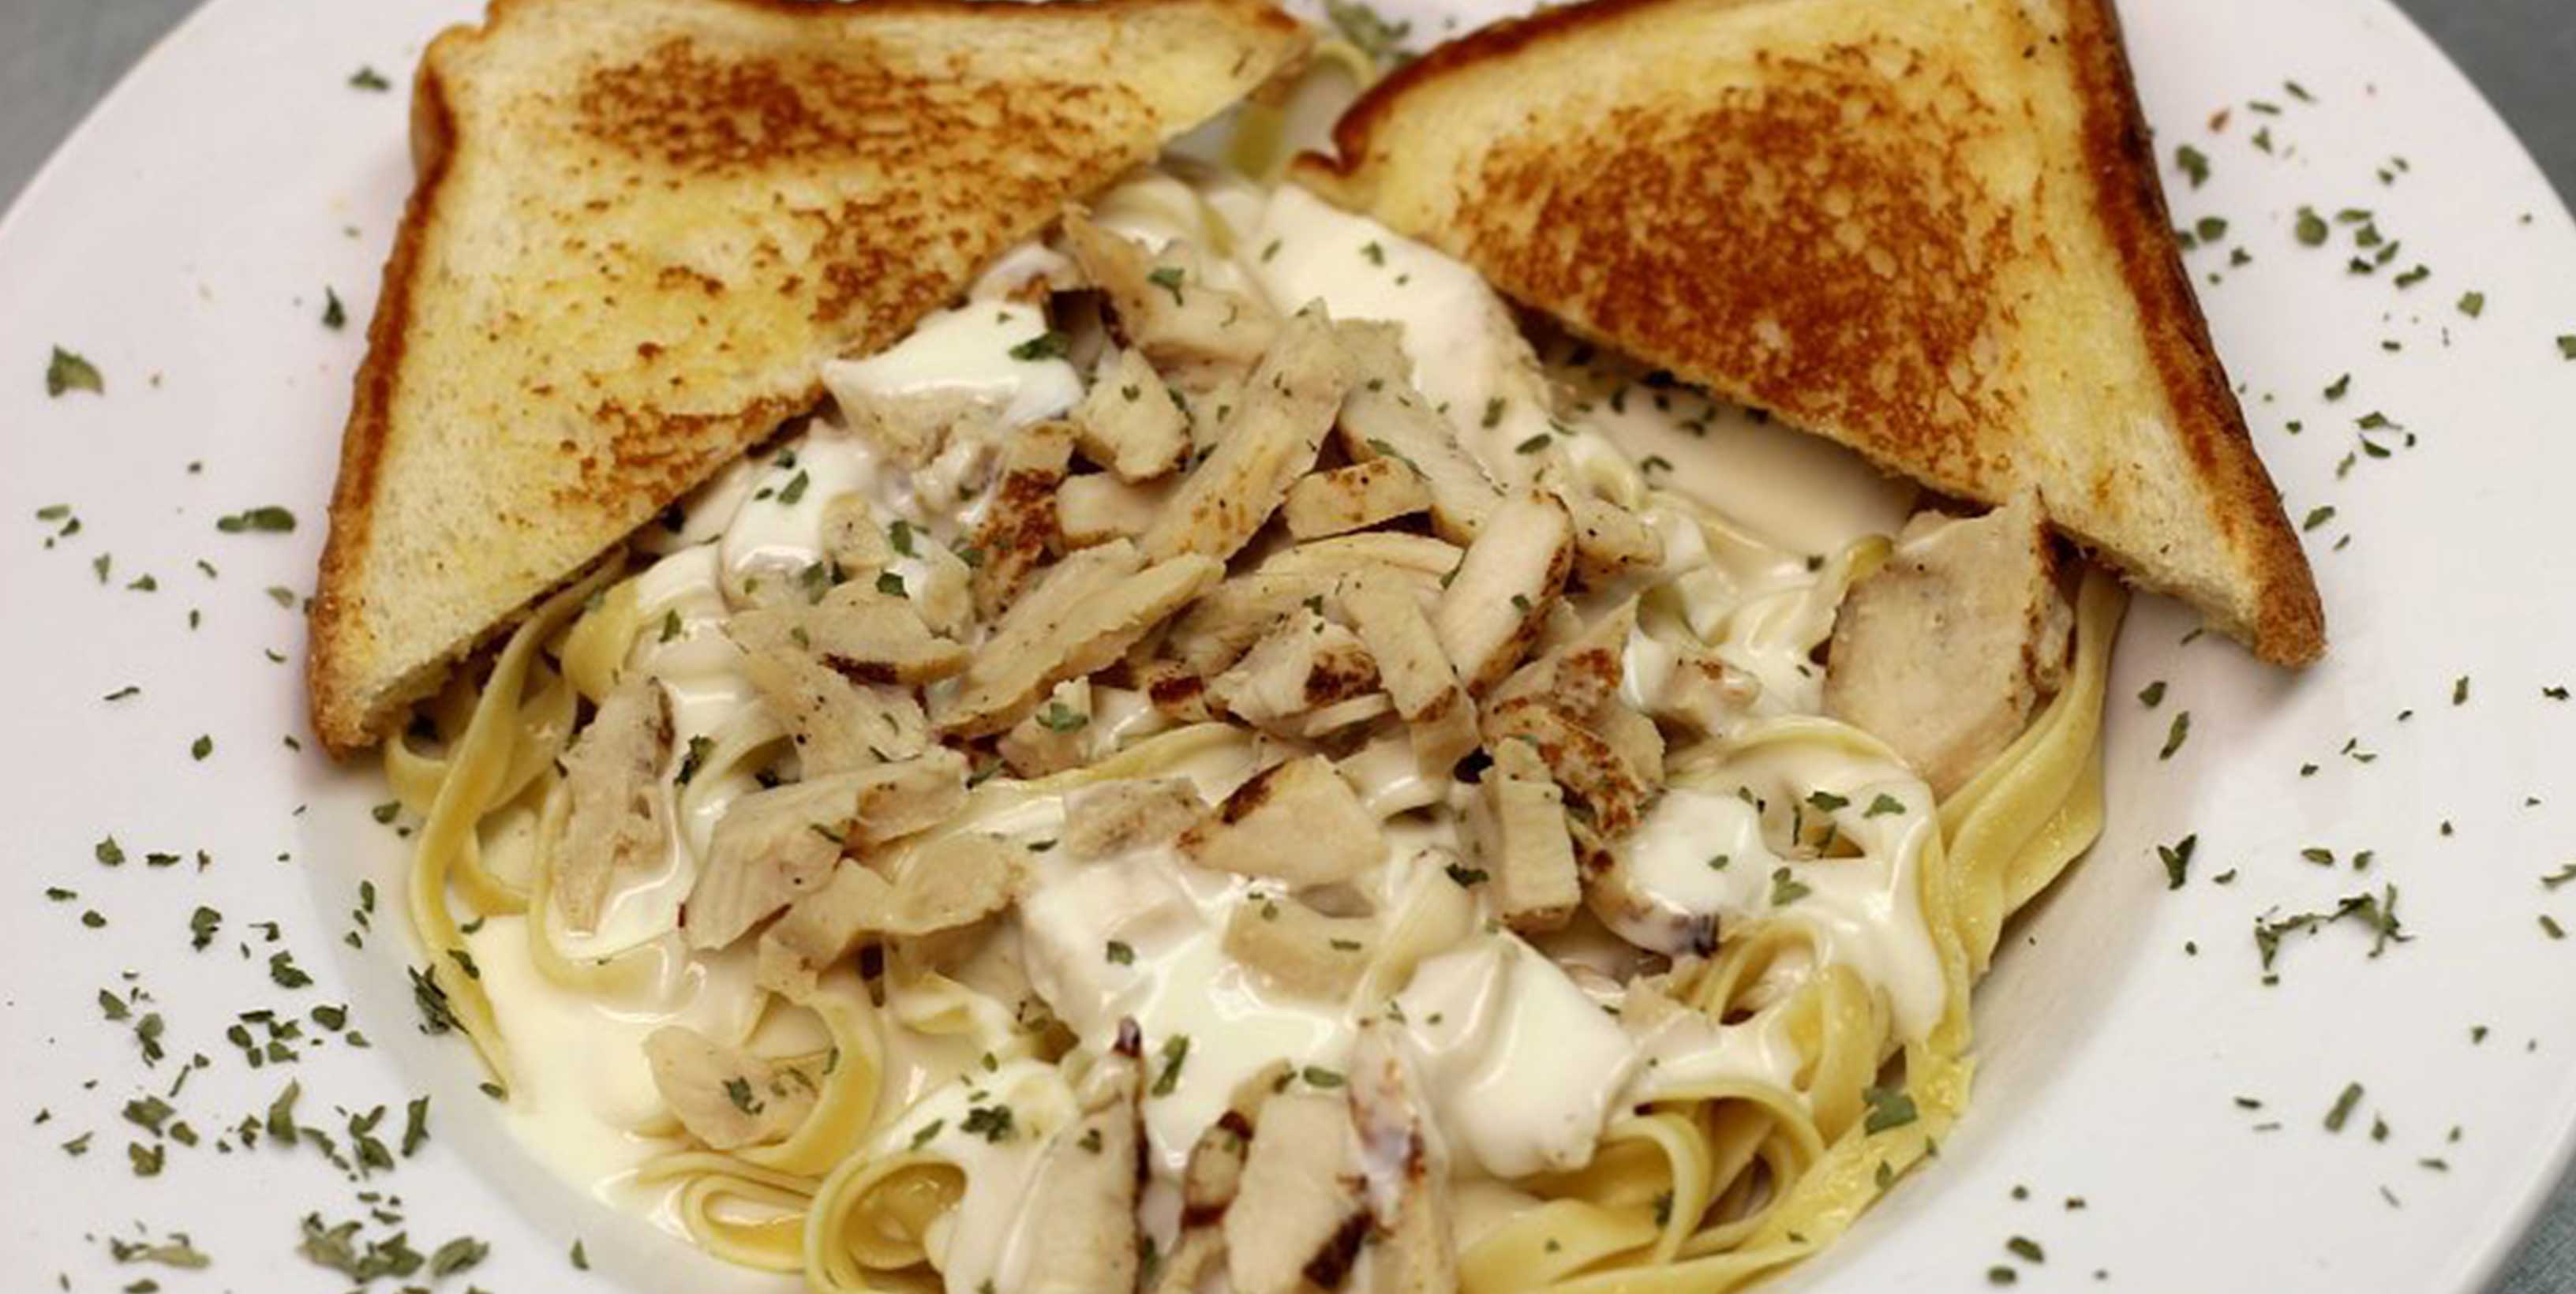 Grilled chicken alfredo pasta with golden slices of toast made at Main Gate Bar & Grill